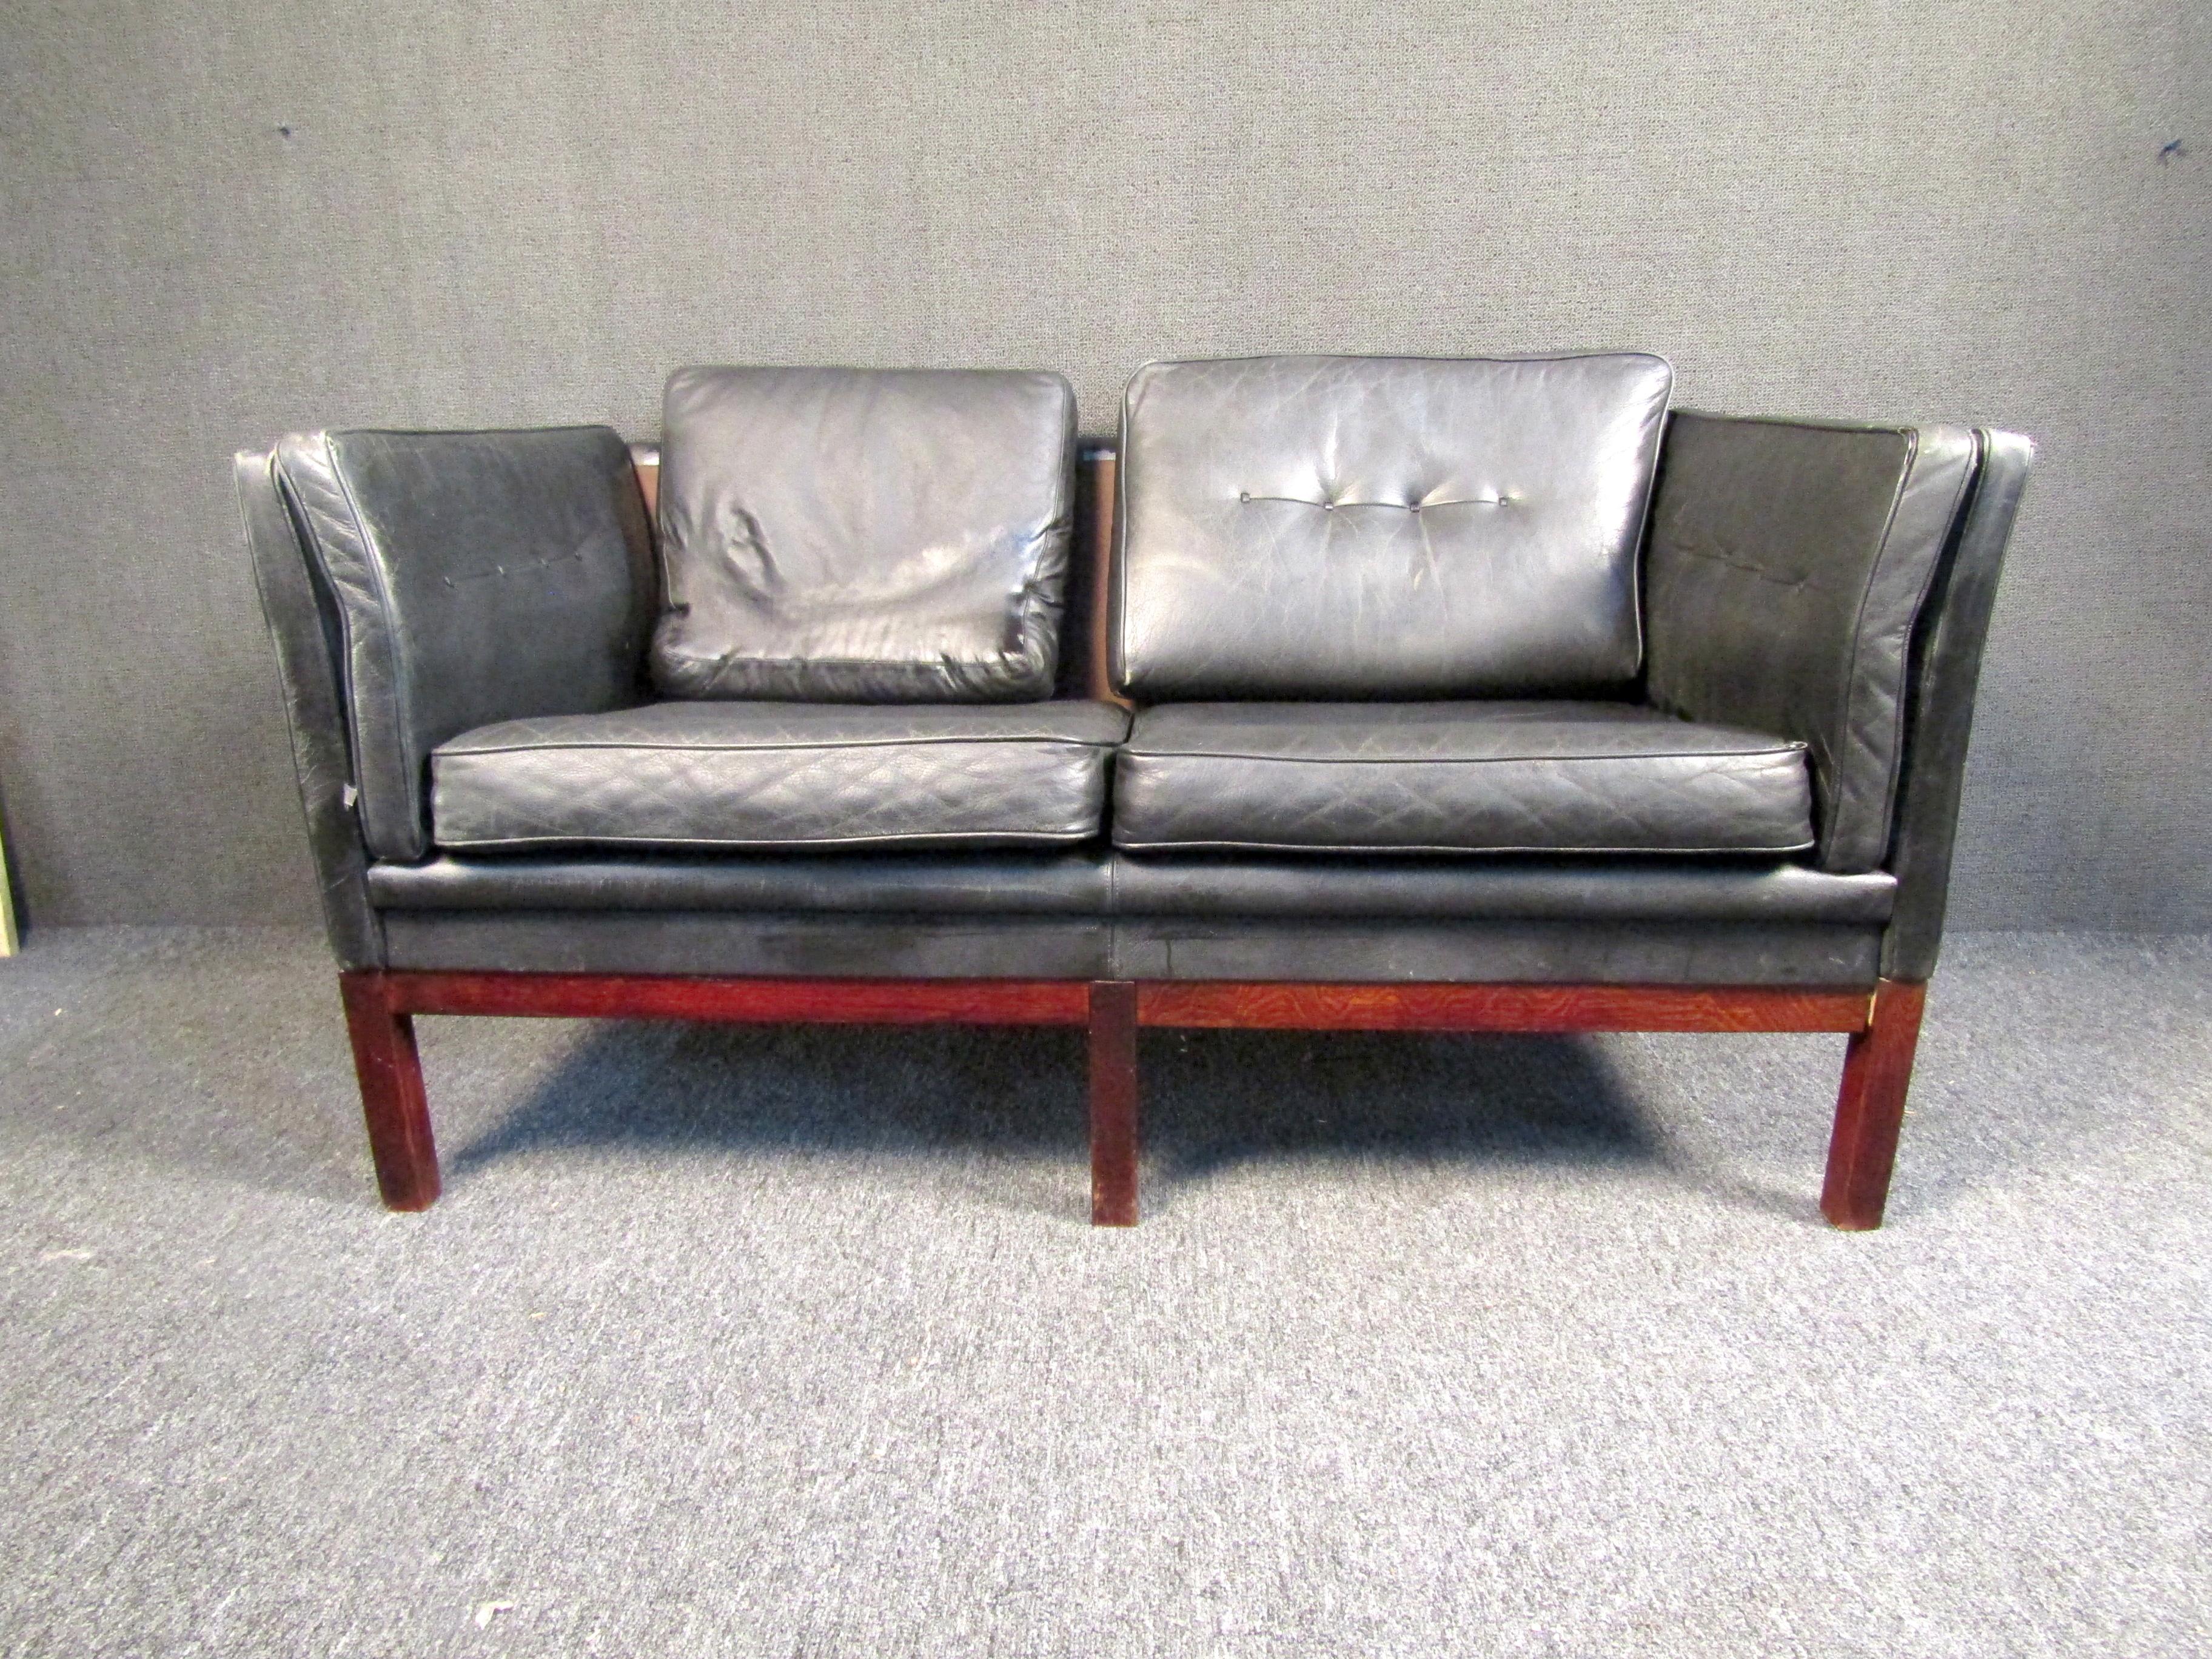 Mid-Century Modern sofa by skippers furniture features mismatch black tufted cushions, rich rosewood grain frame. This sofa would make a great addition to any home or office.

Please confirm item location (NY or NJ).